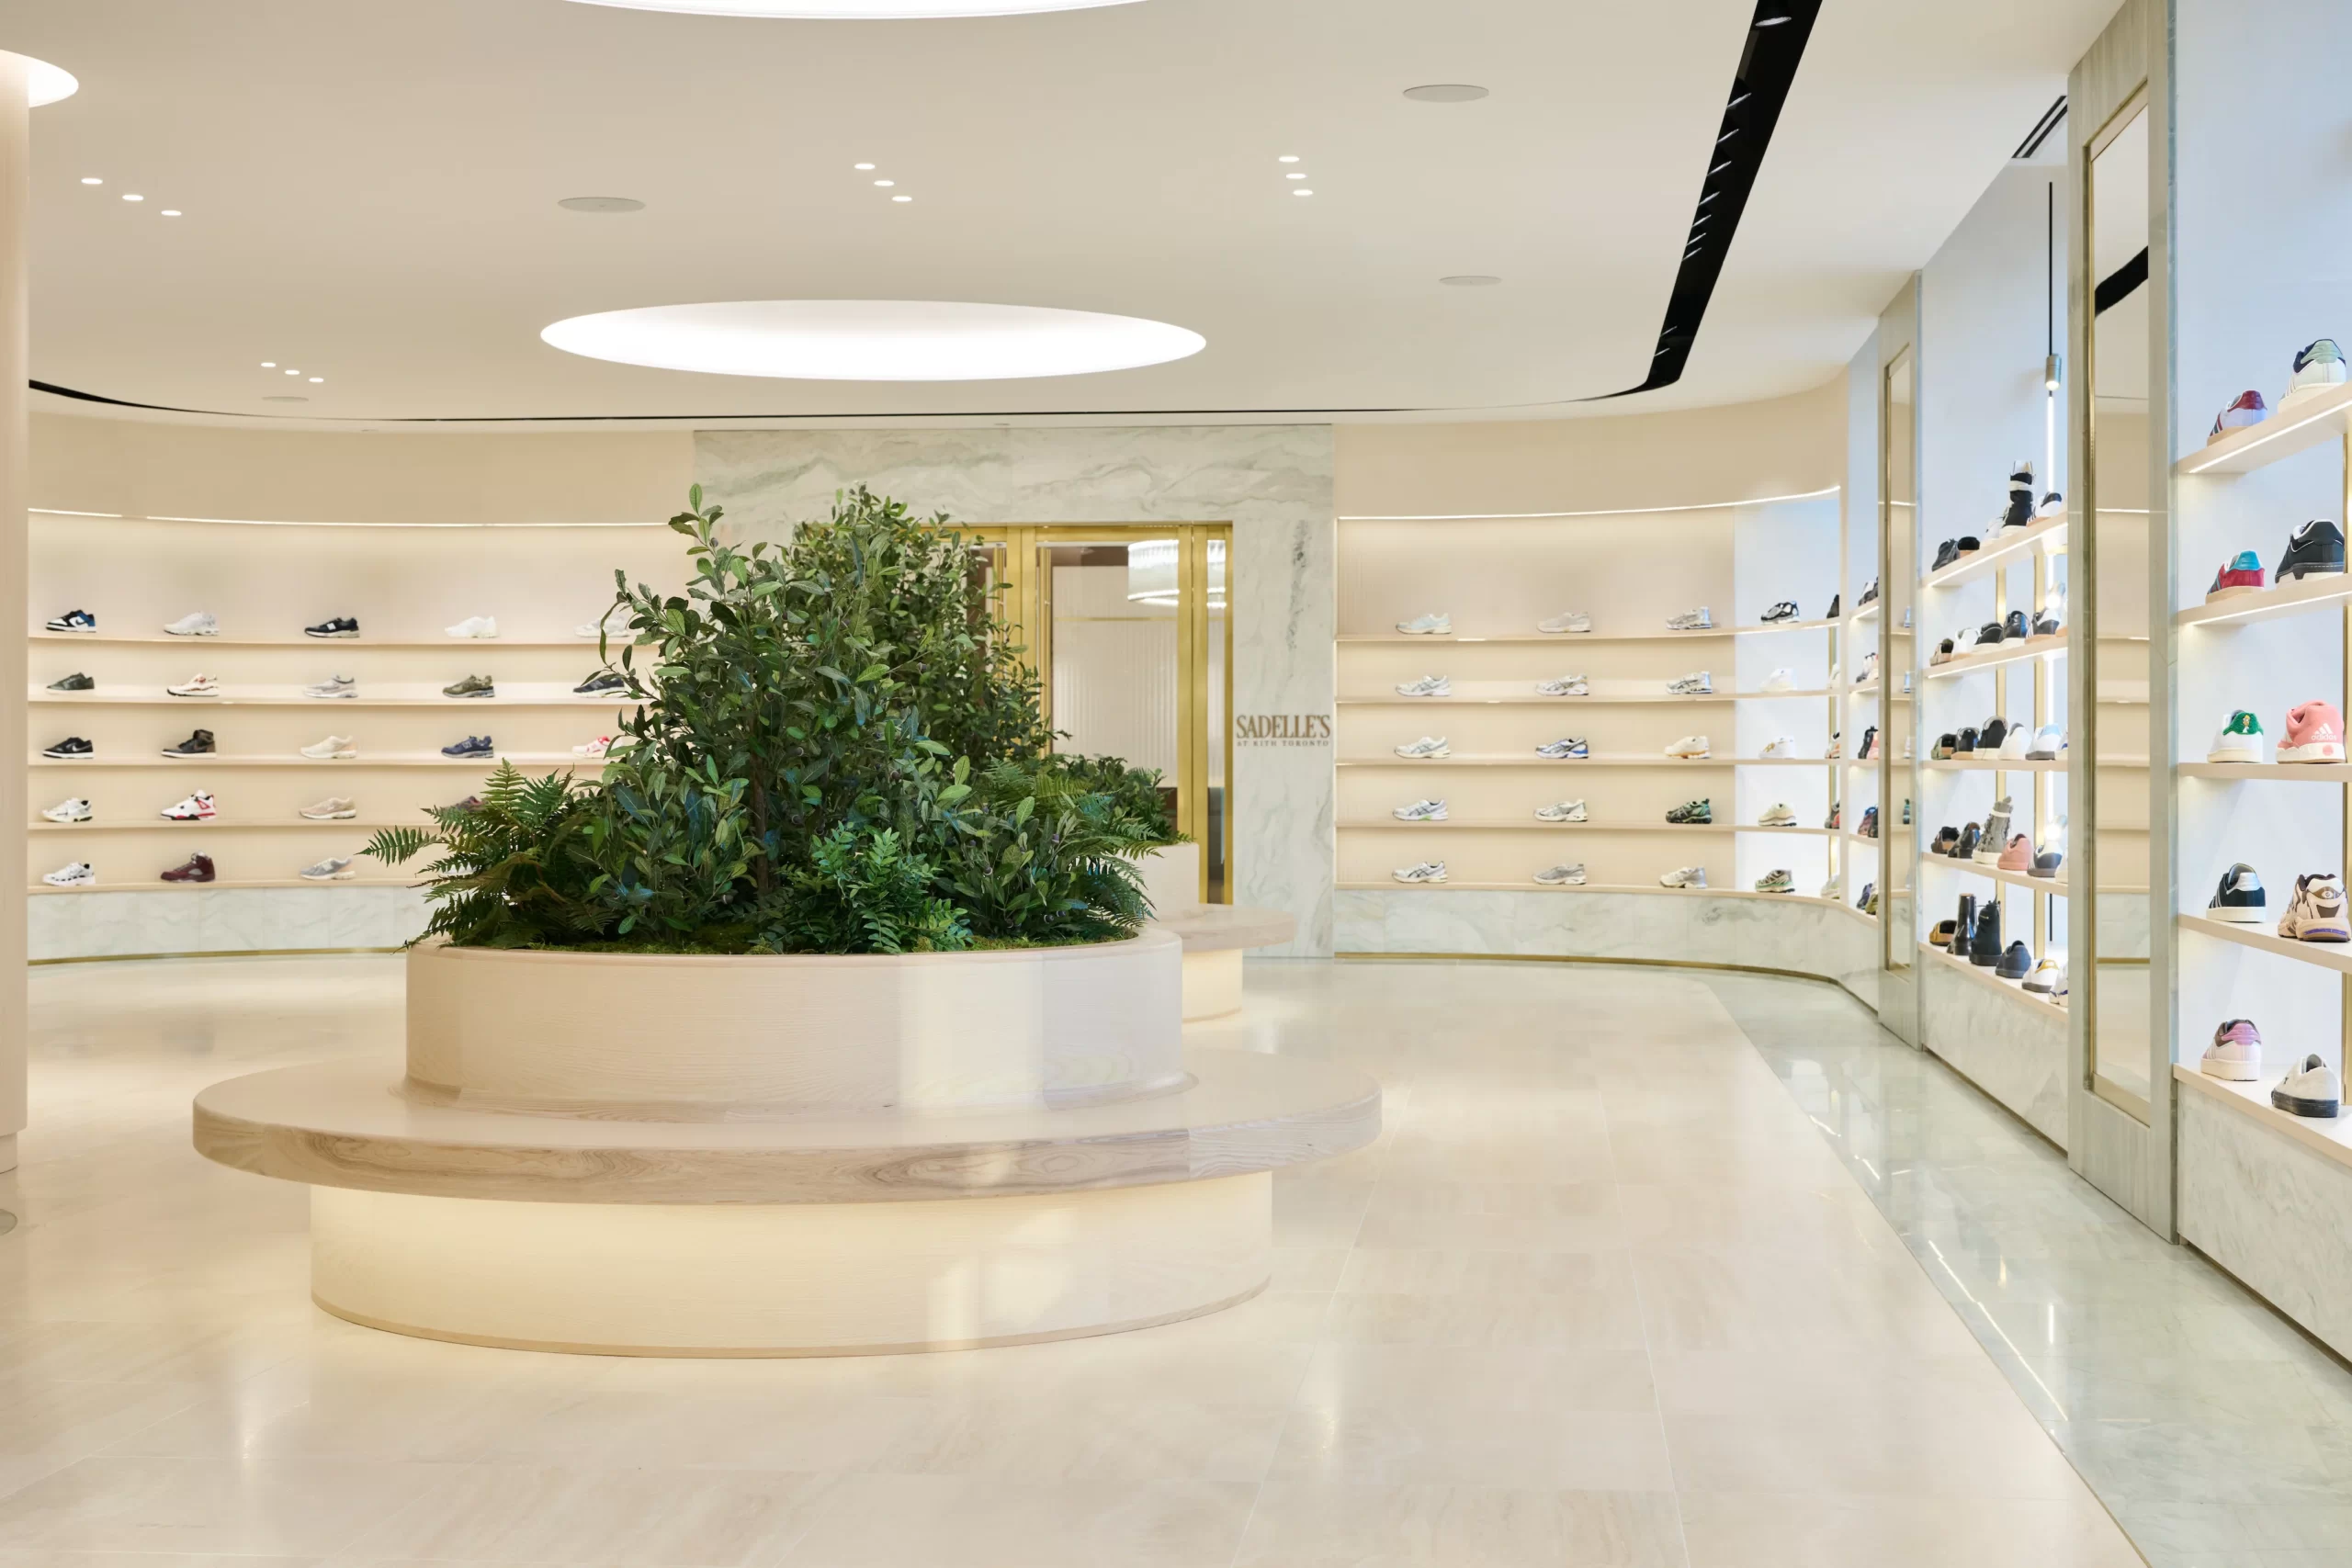 EXCLUSIVE: Anine Bing Opens L.A. Flagship, Invests in Retail as